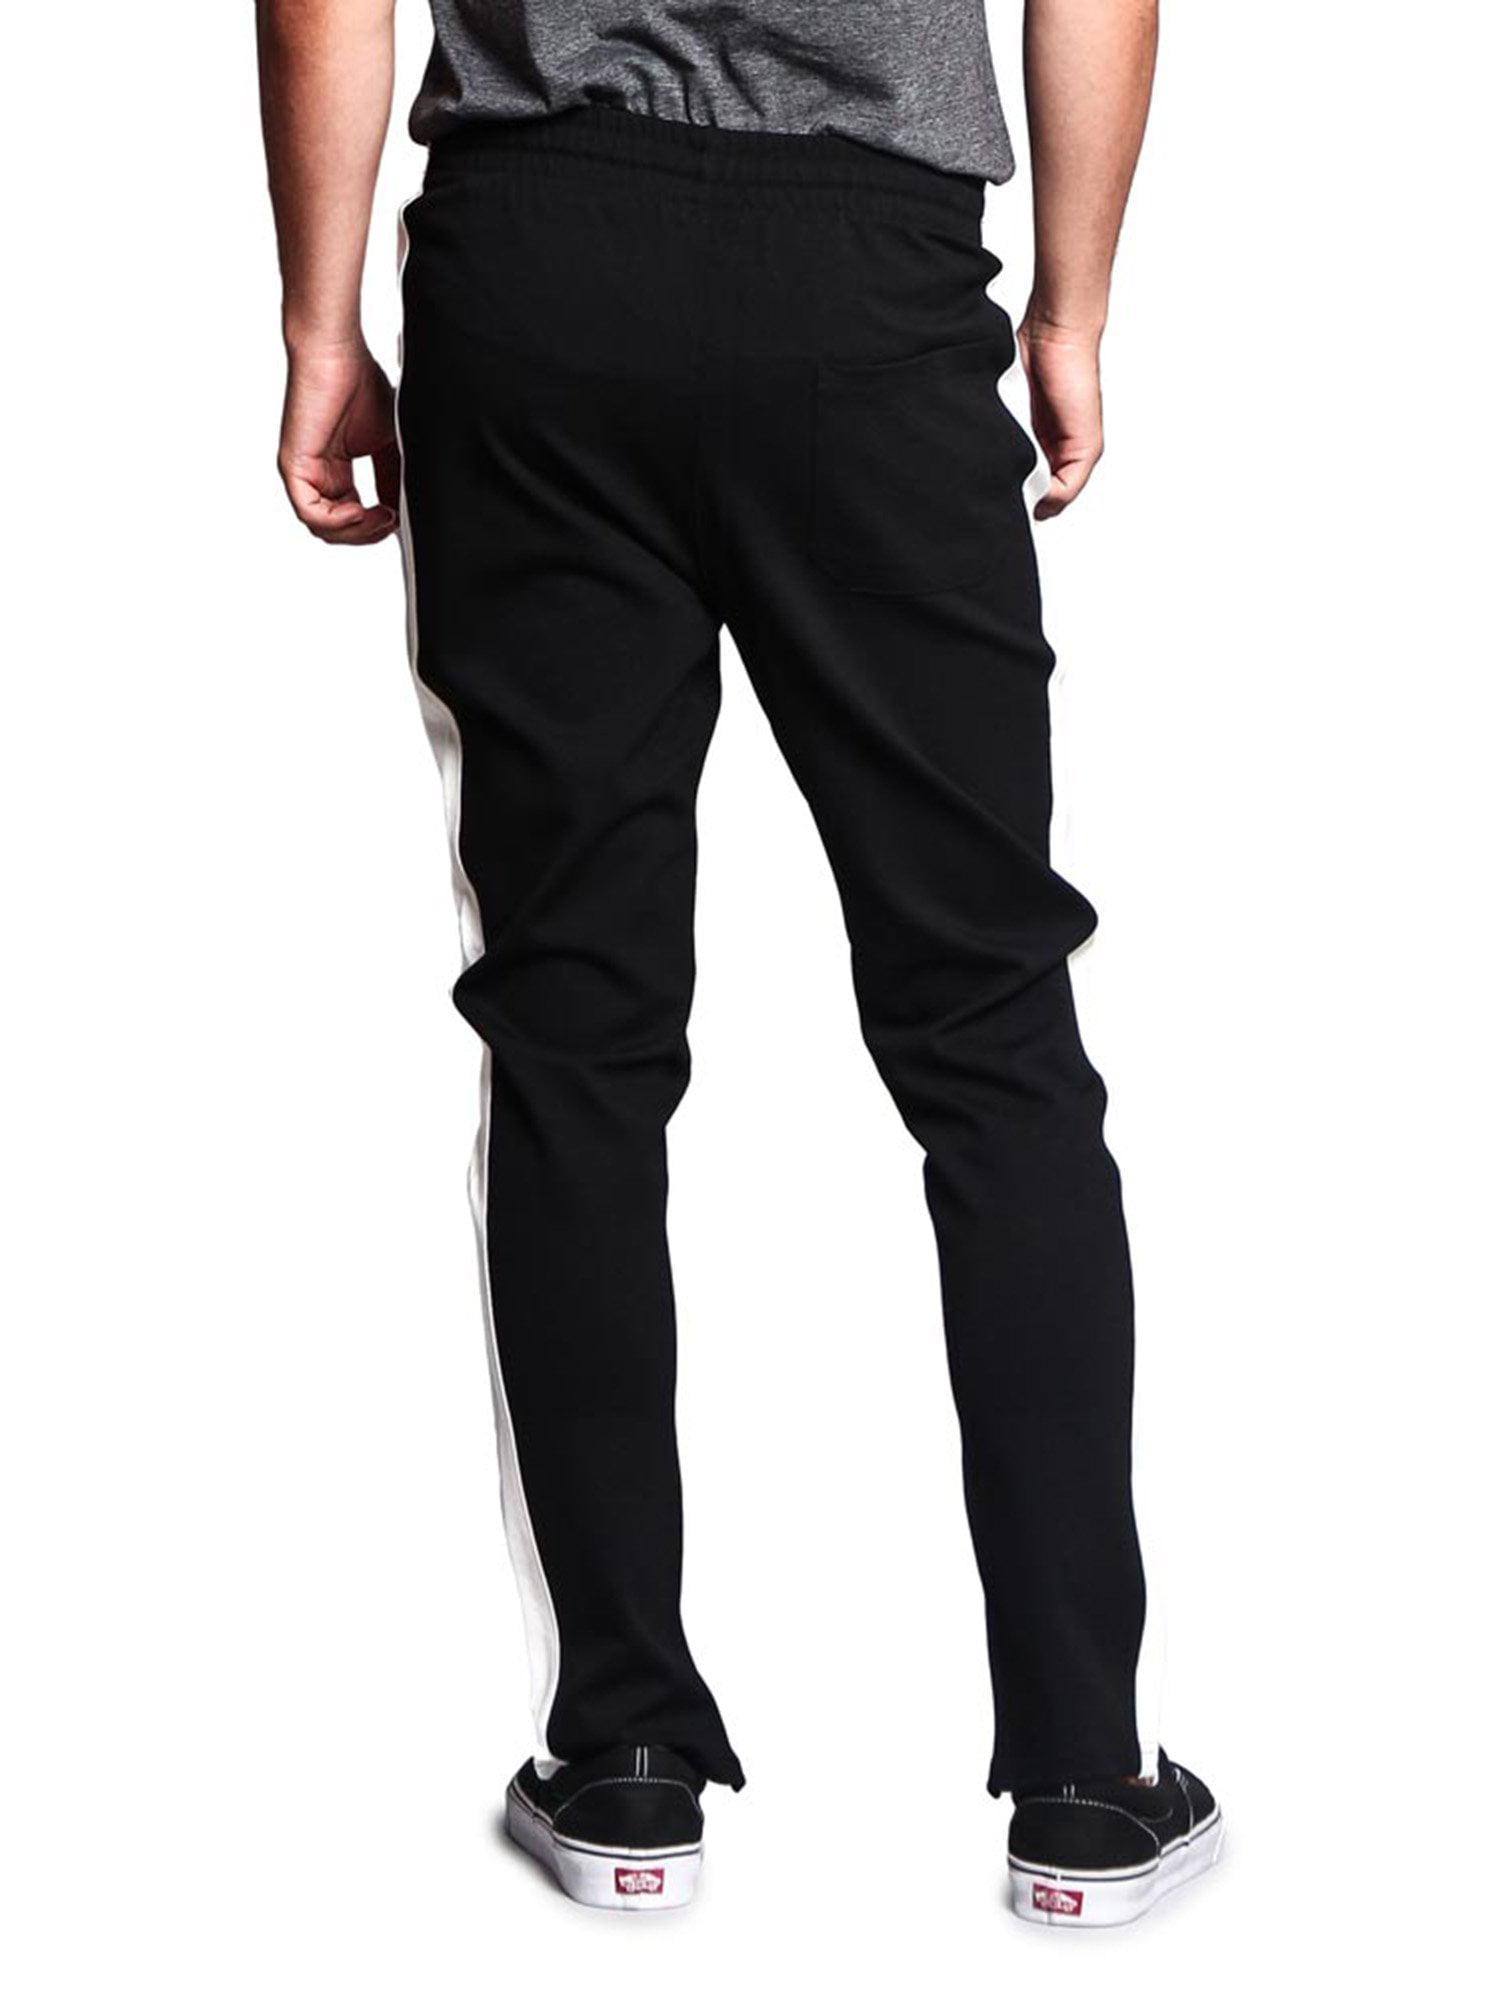 G-Style USA Men's Hip Hop Slim Fit Track Pants - Athletic Jogger with Side  Stripe - Black/Off-White - 2X-Large 